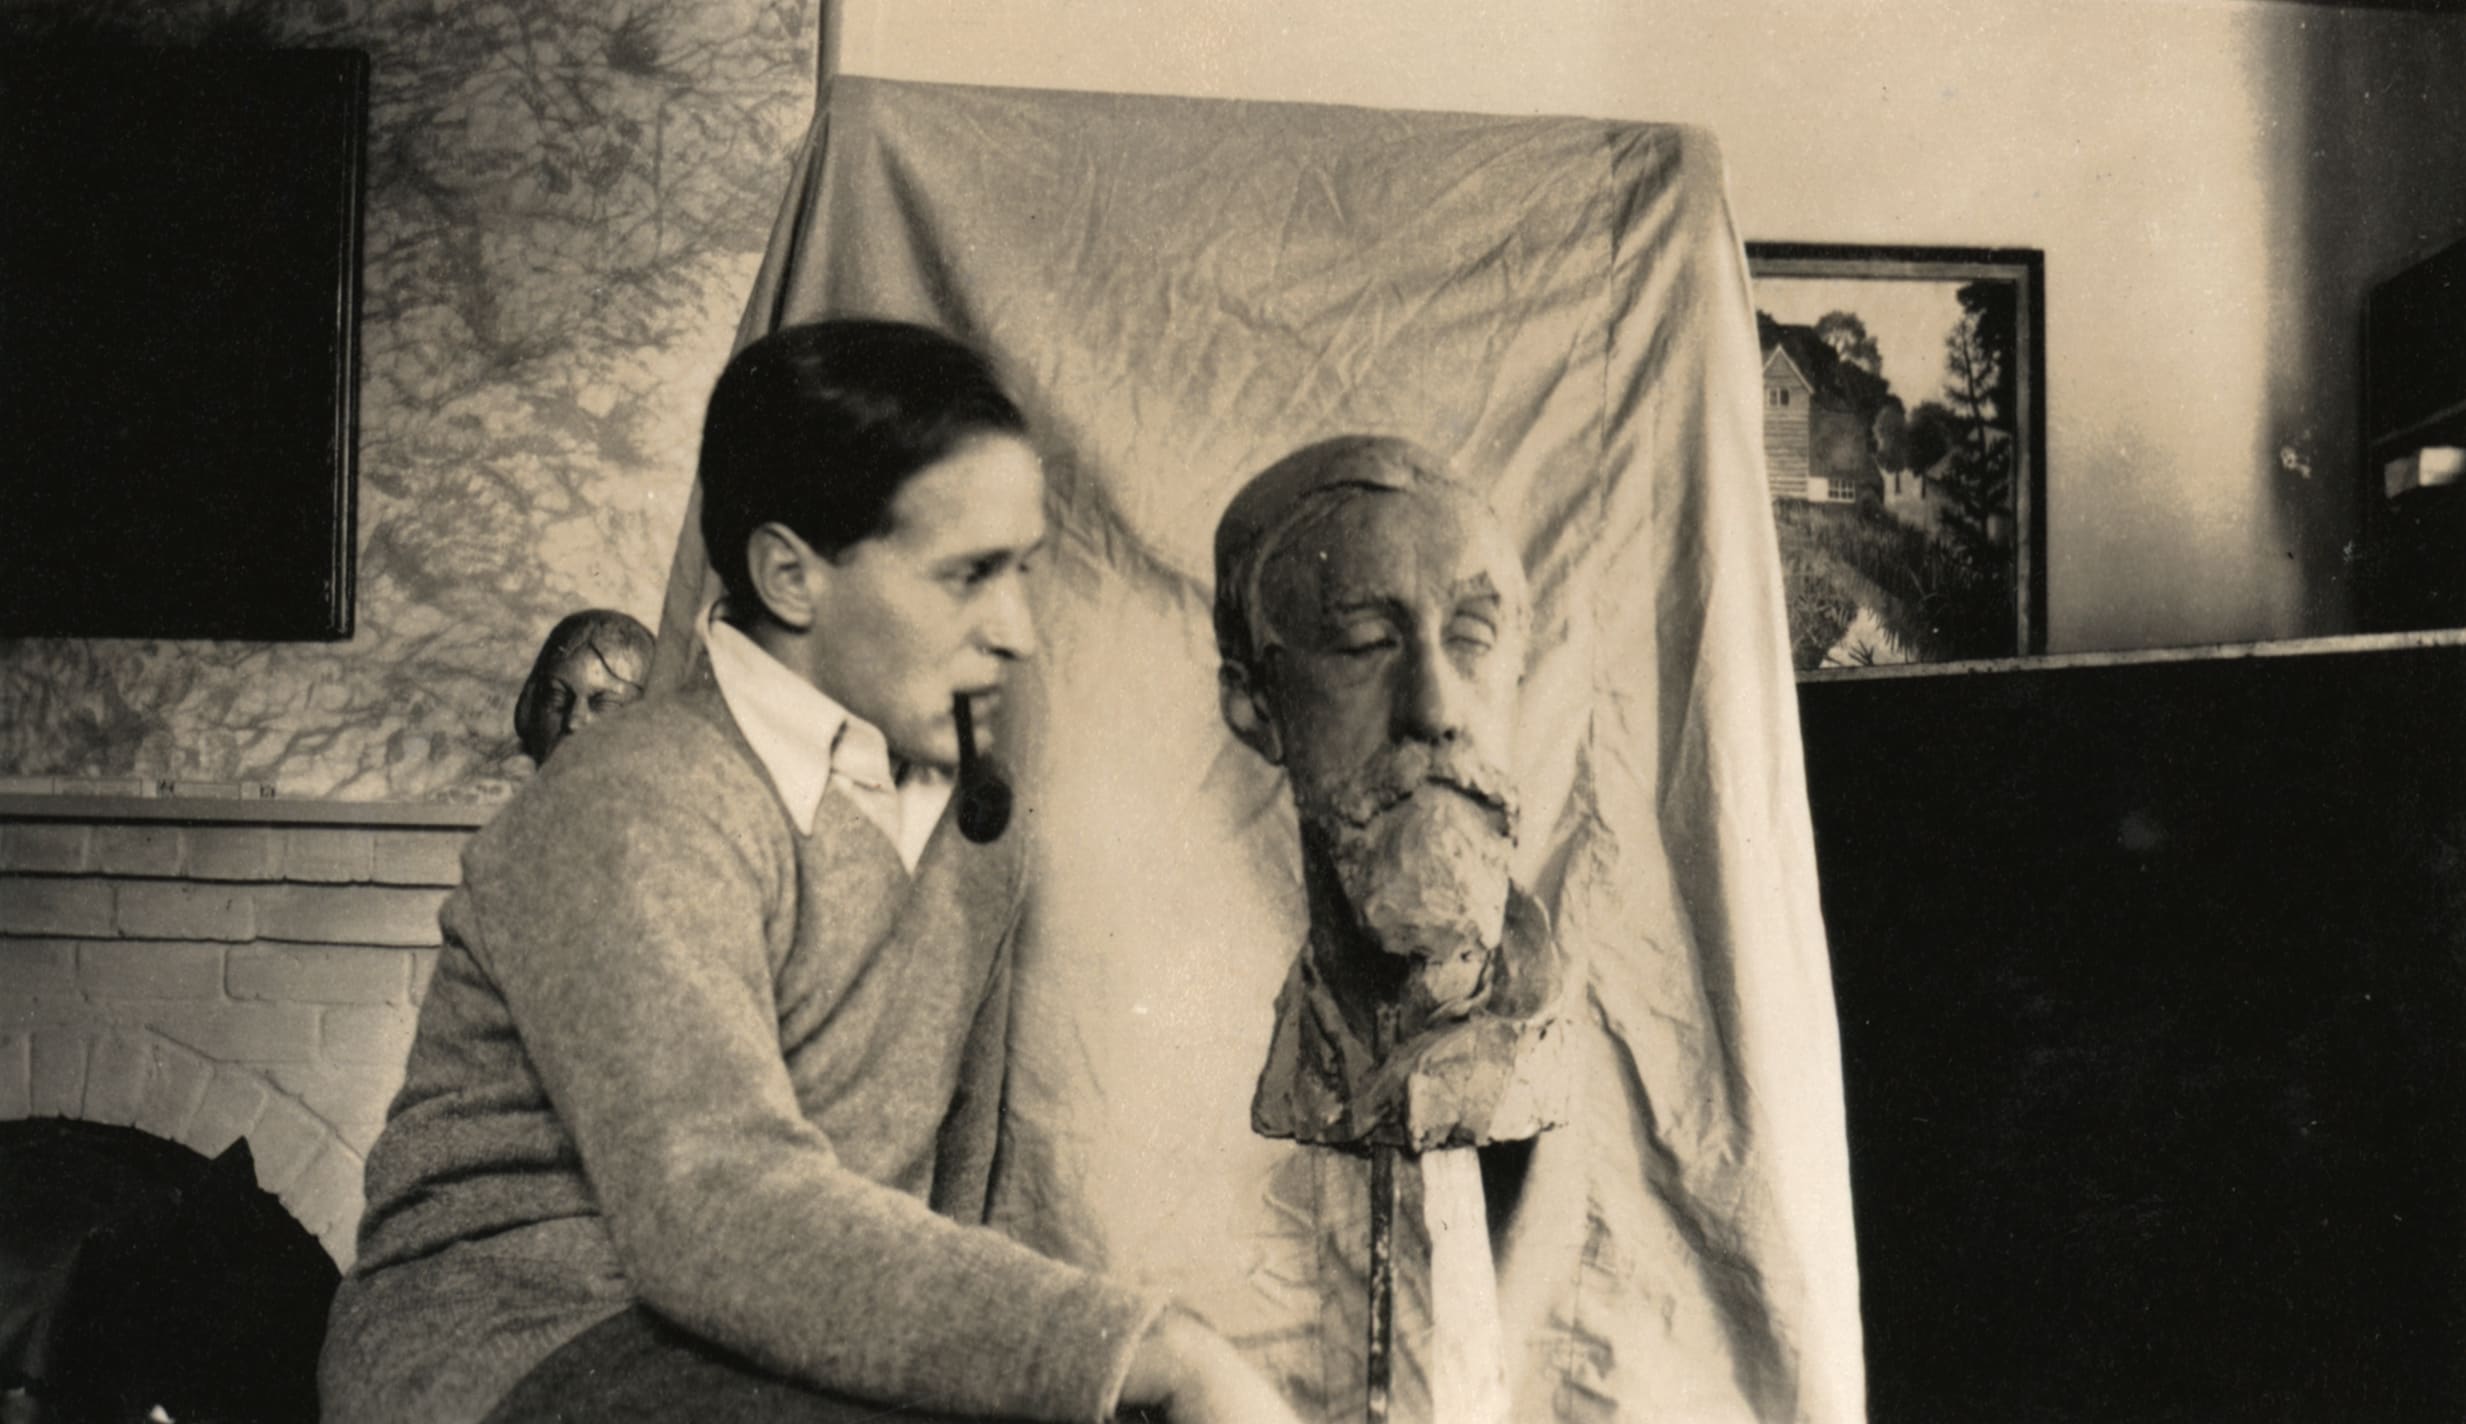 Stephen Tomlin with his bust of Lytton Strachey